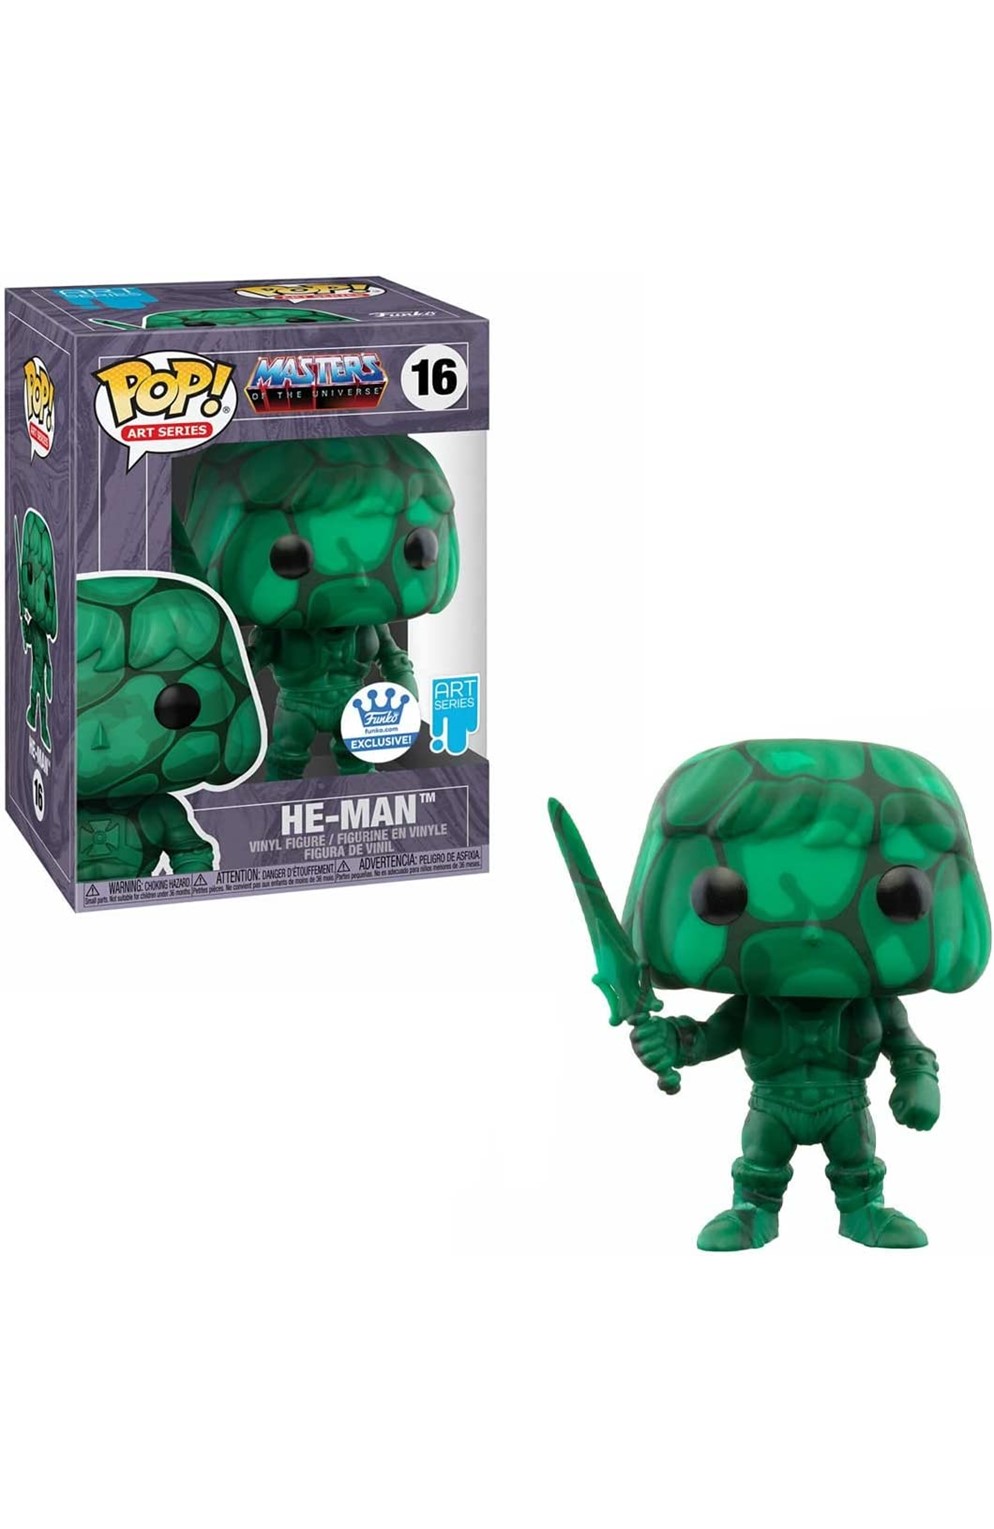 Funko Pop! 16 Masters of the Universe He-Man Art Series Exclusive